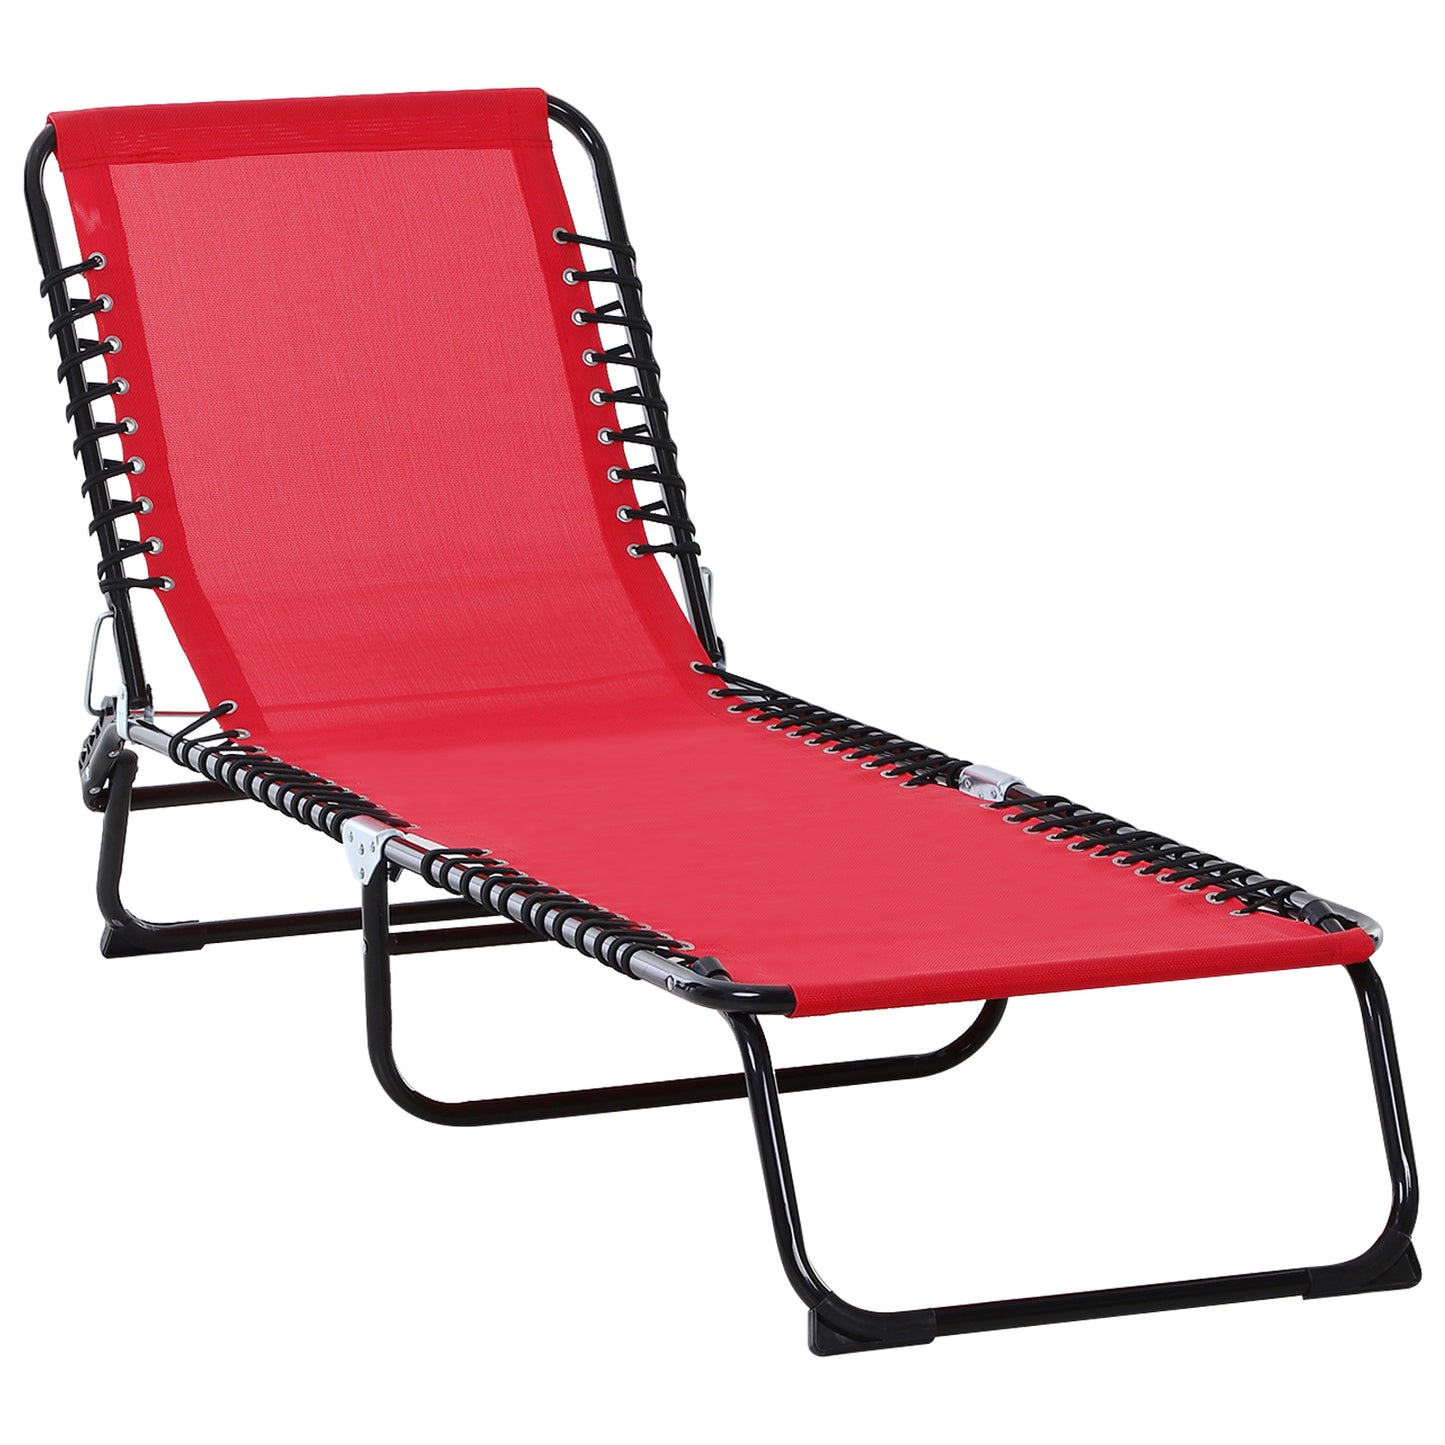 Folding Outdoor Lounge Chair, 4-Level Adjustable Backrest Chaise Lounge, Portable Tanning Chair, Beach Bed with Breathable Mesh for Beach, Yard, Patio, Wine Red at Gallery Canada